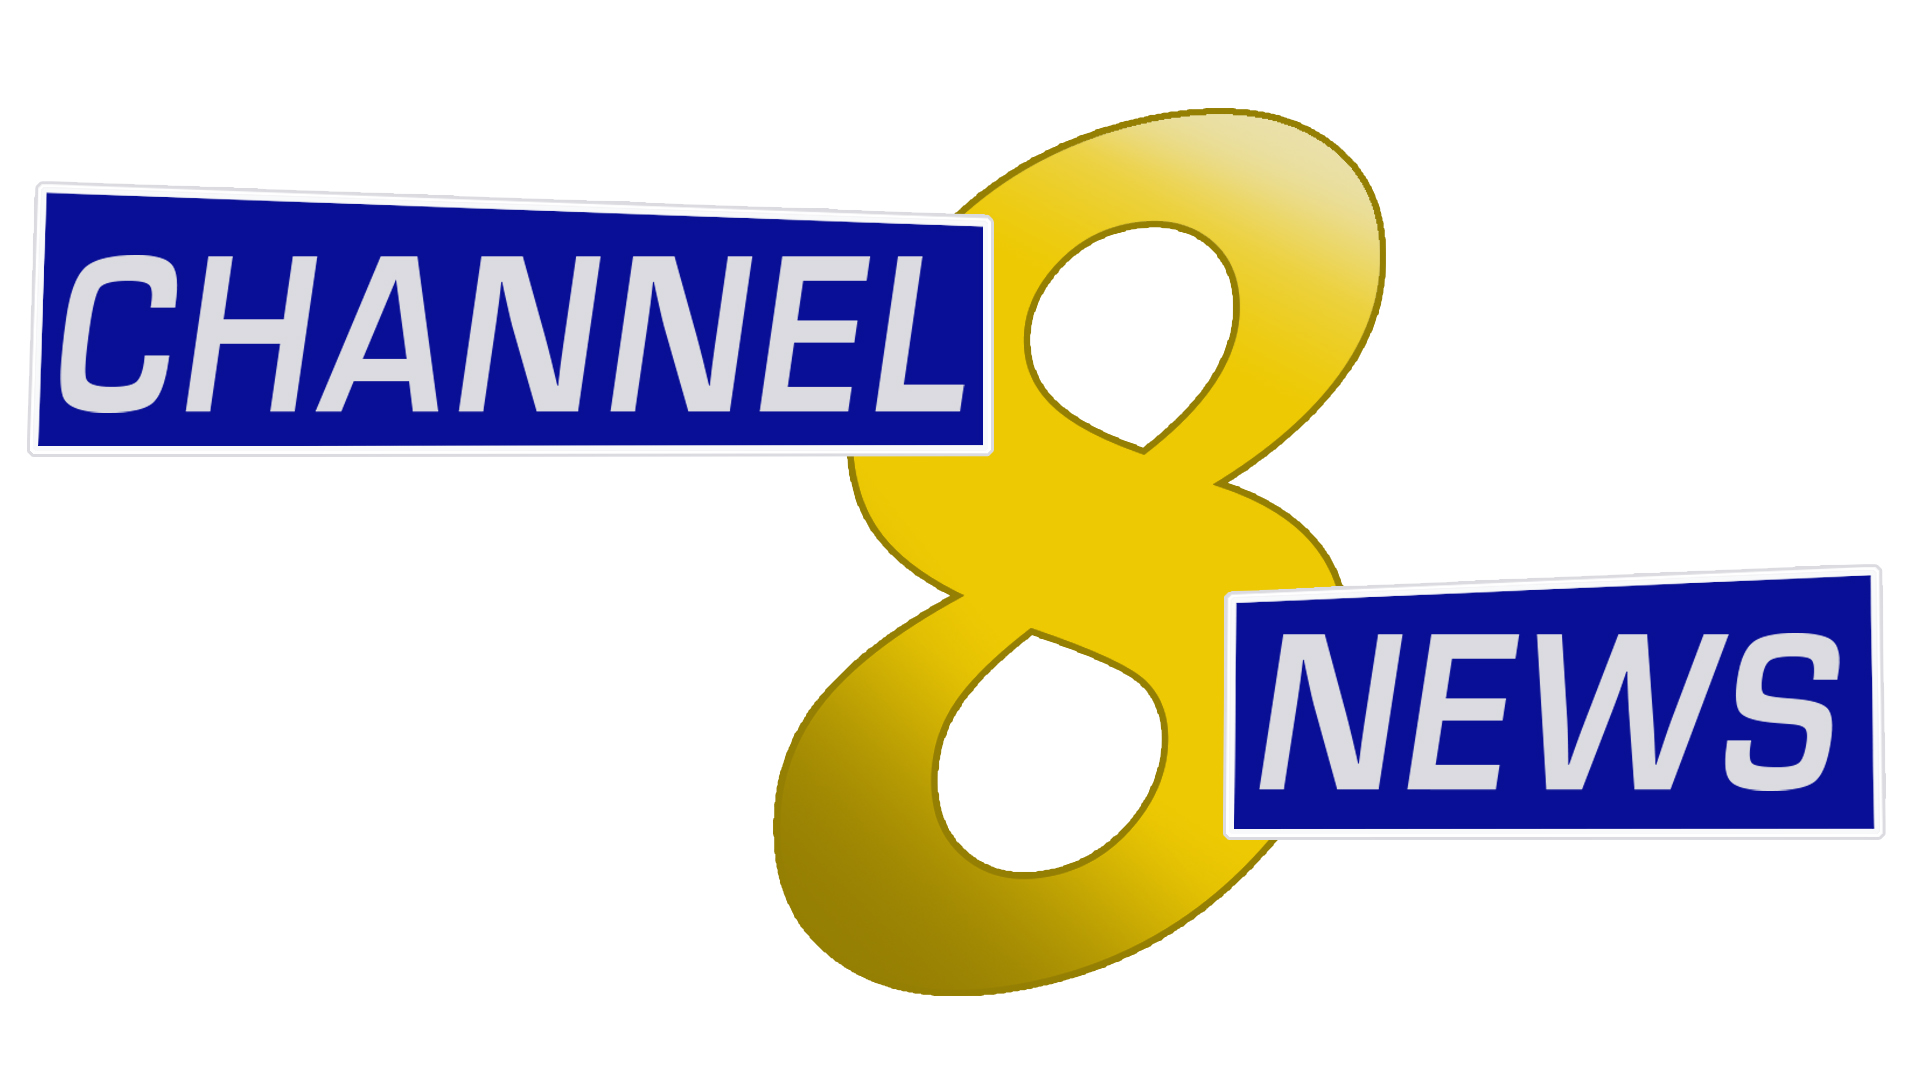 channel 8 news screen background